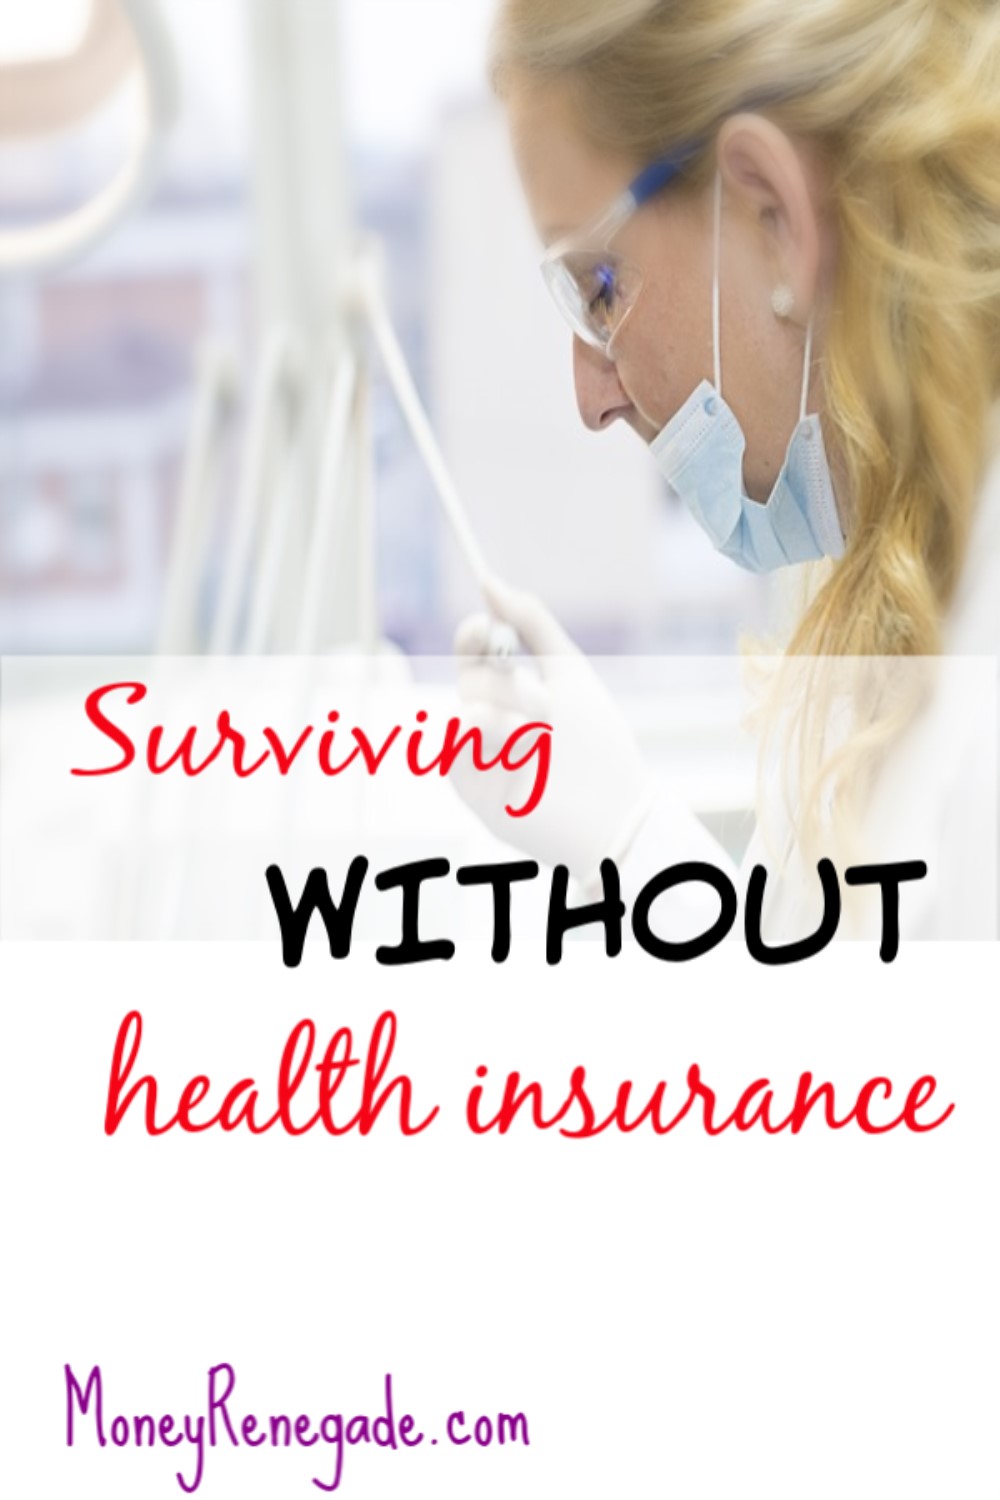 Surviving without health insurance